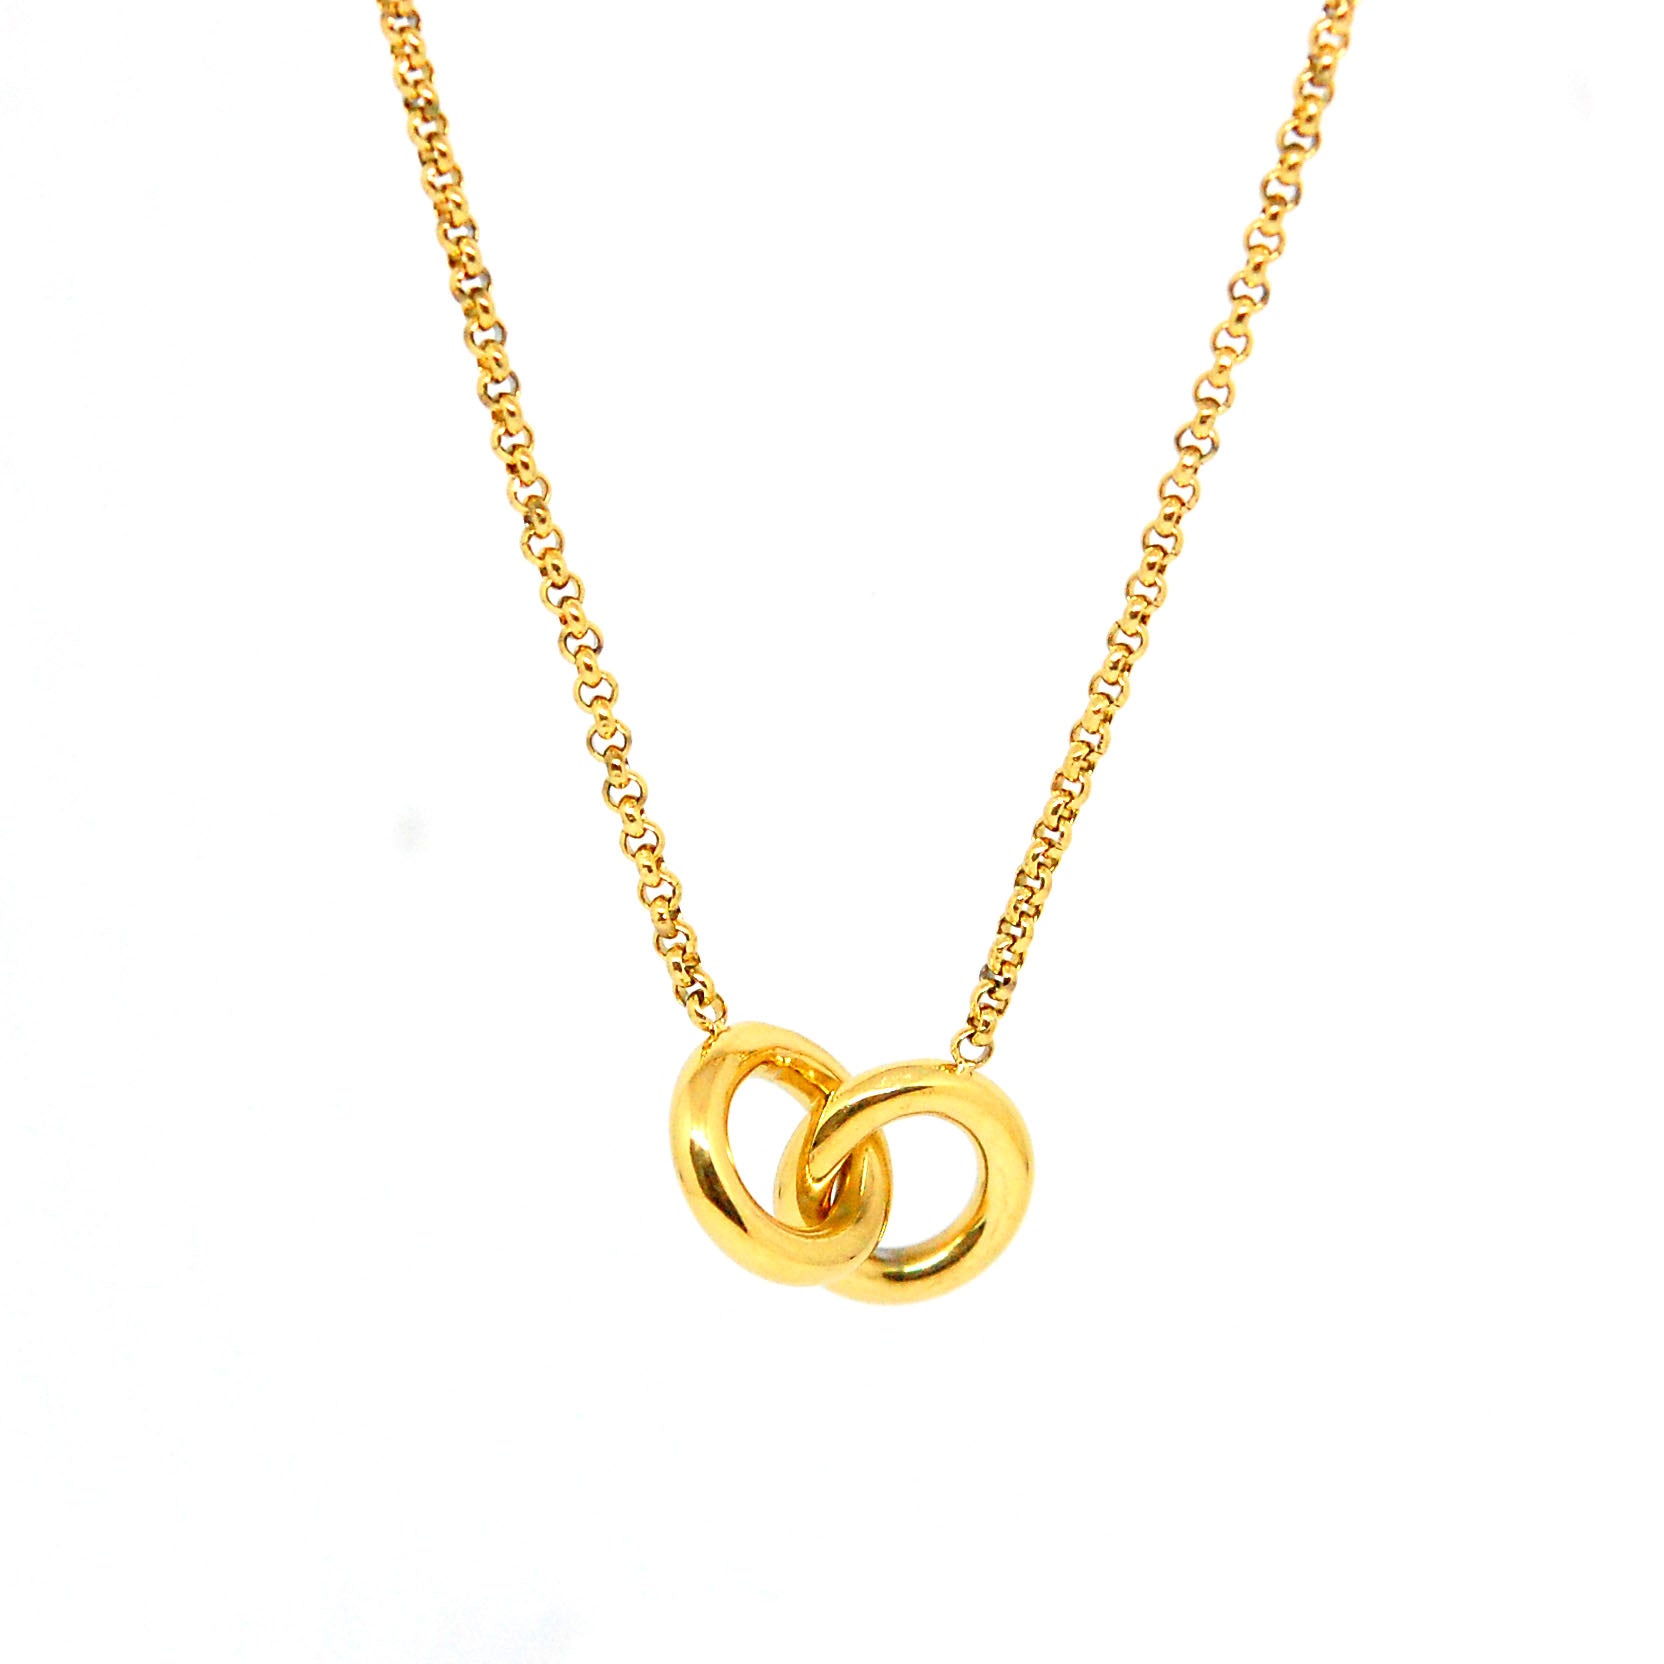 ESN 8146: All IPG Infinity Double Circle Necklace (16"+2" )